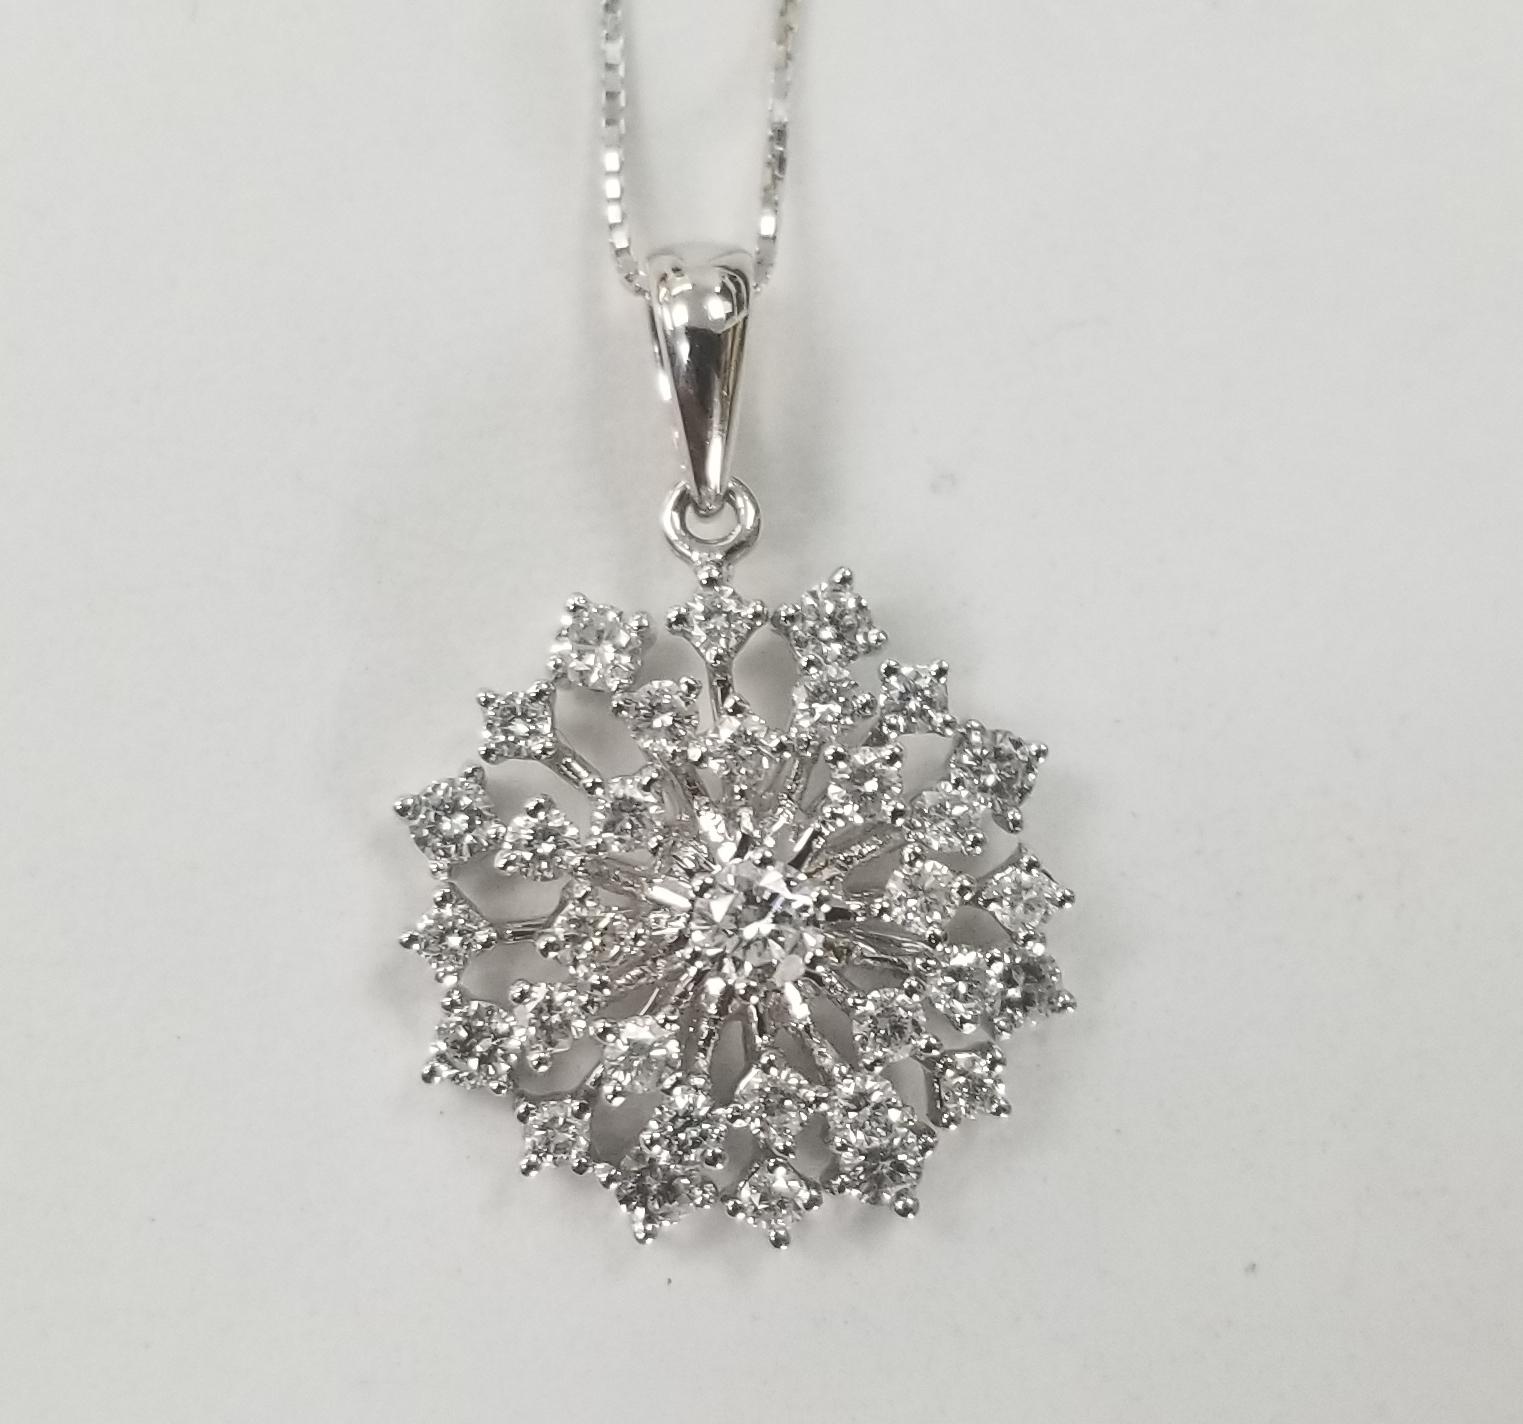 14K white gold cluster diamond necklace with approximately 0.75 carat total weight of white eye clean round diamonds, H in color, VS2 in clarity. The length of the chain is 18 inches.
Specifications:
    main stone:   diamonds:32
    carat total